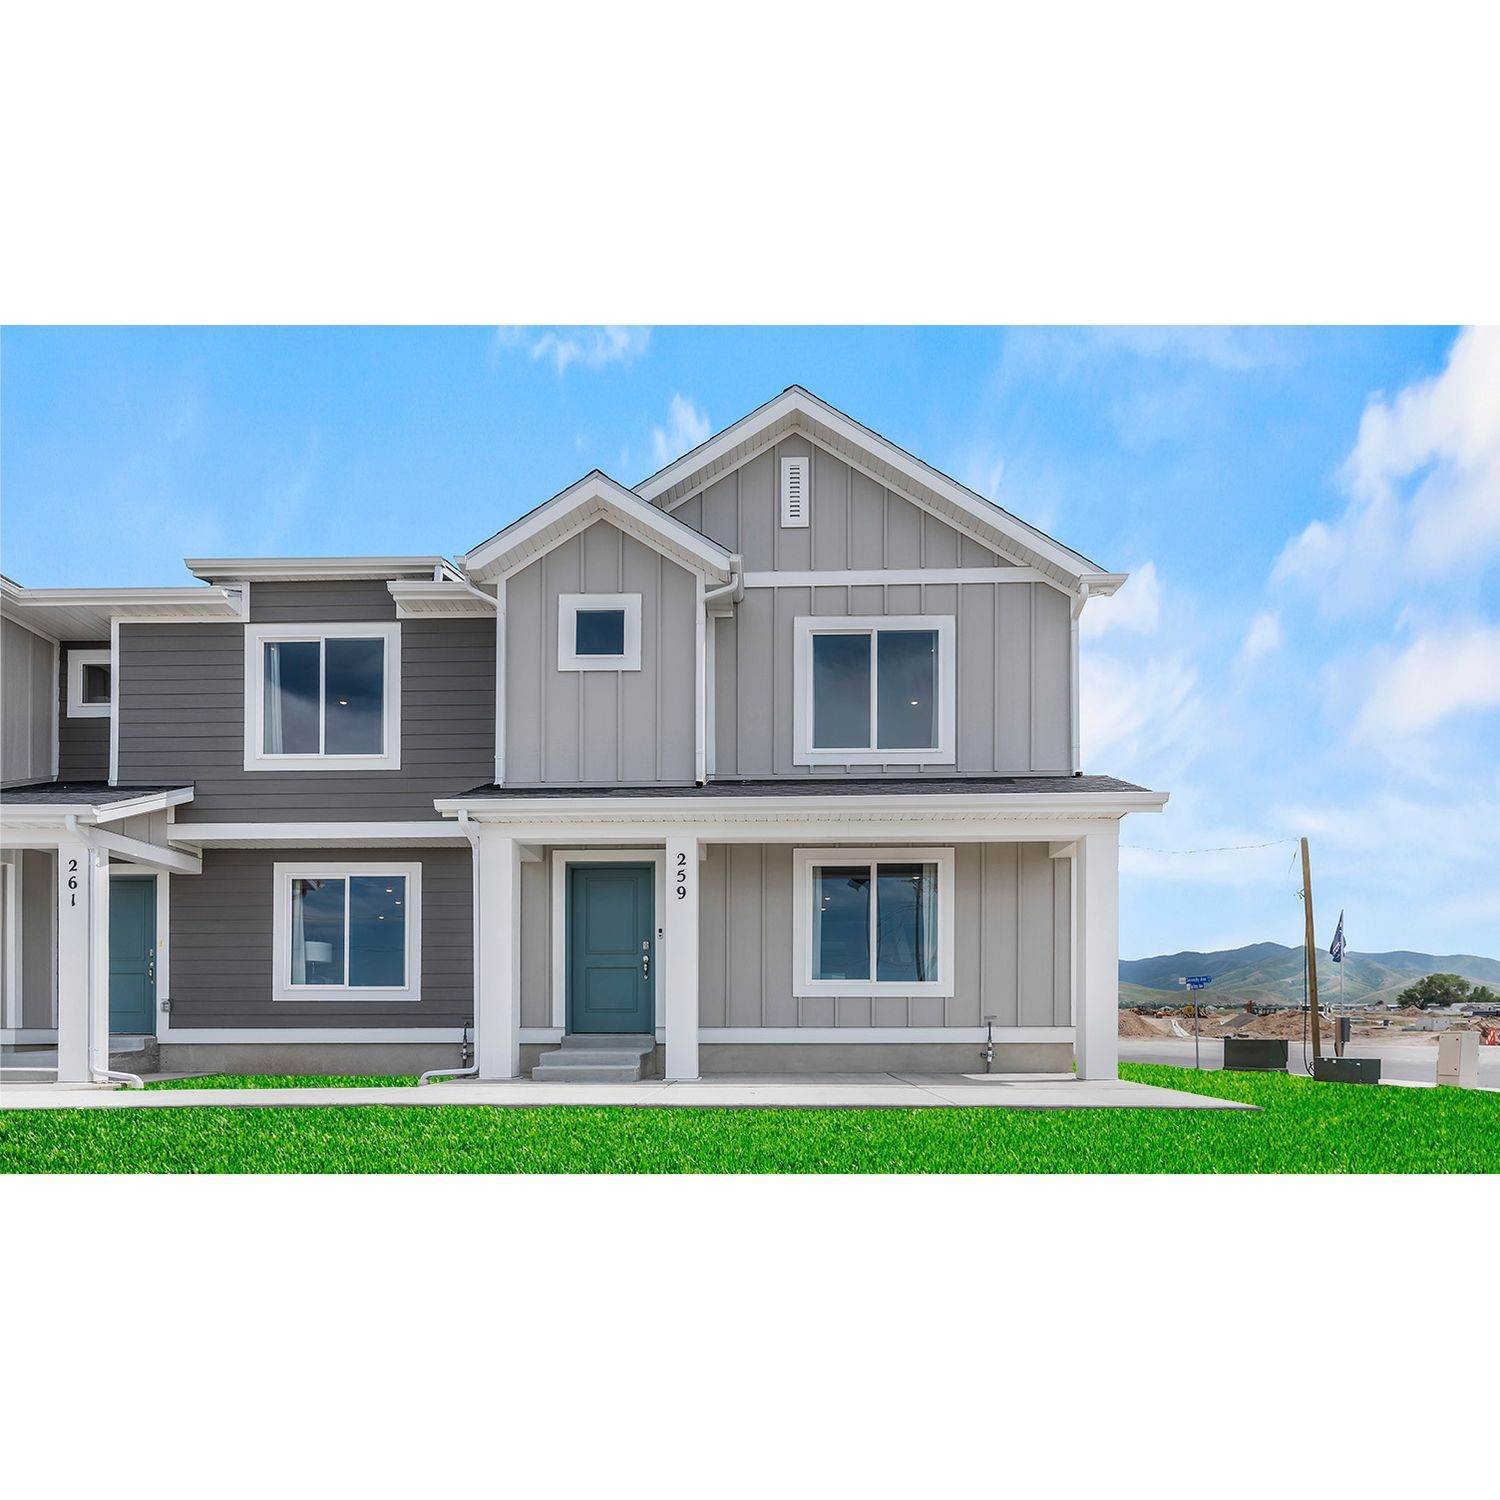 6. Western Acres xây dựng tại 259 East Serenity Avenue, Tooele, UT 84074